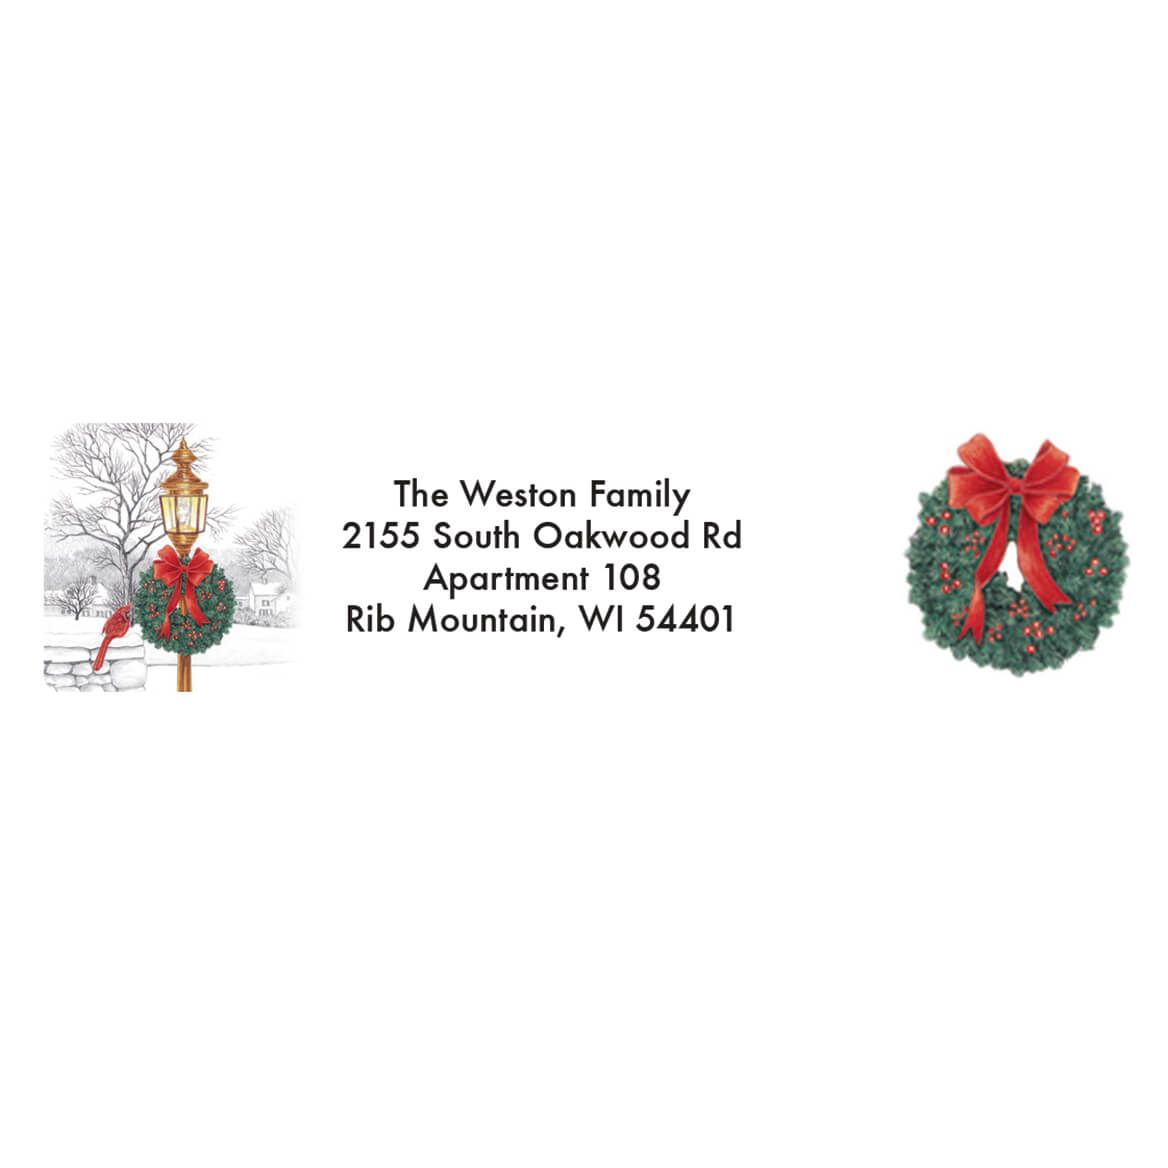 Personalized Lamppost Christmas Address Labels & Seals 20 + '-' + 364761